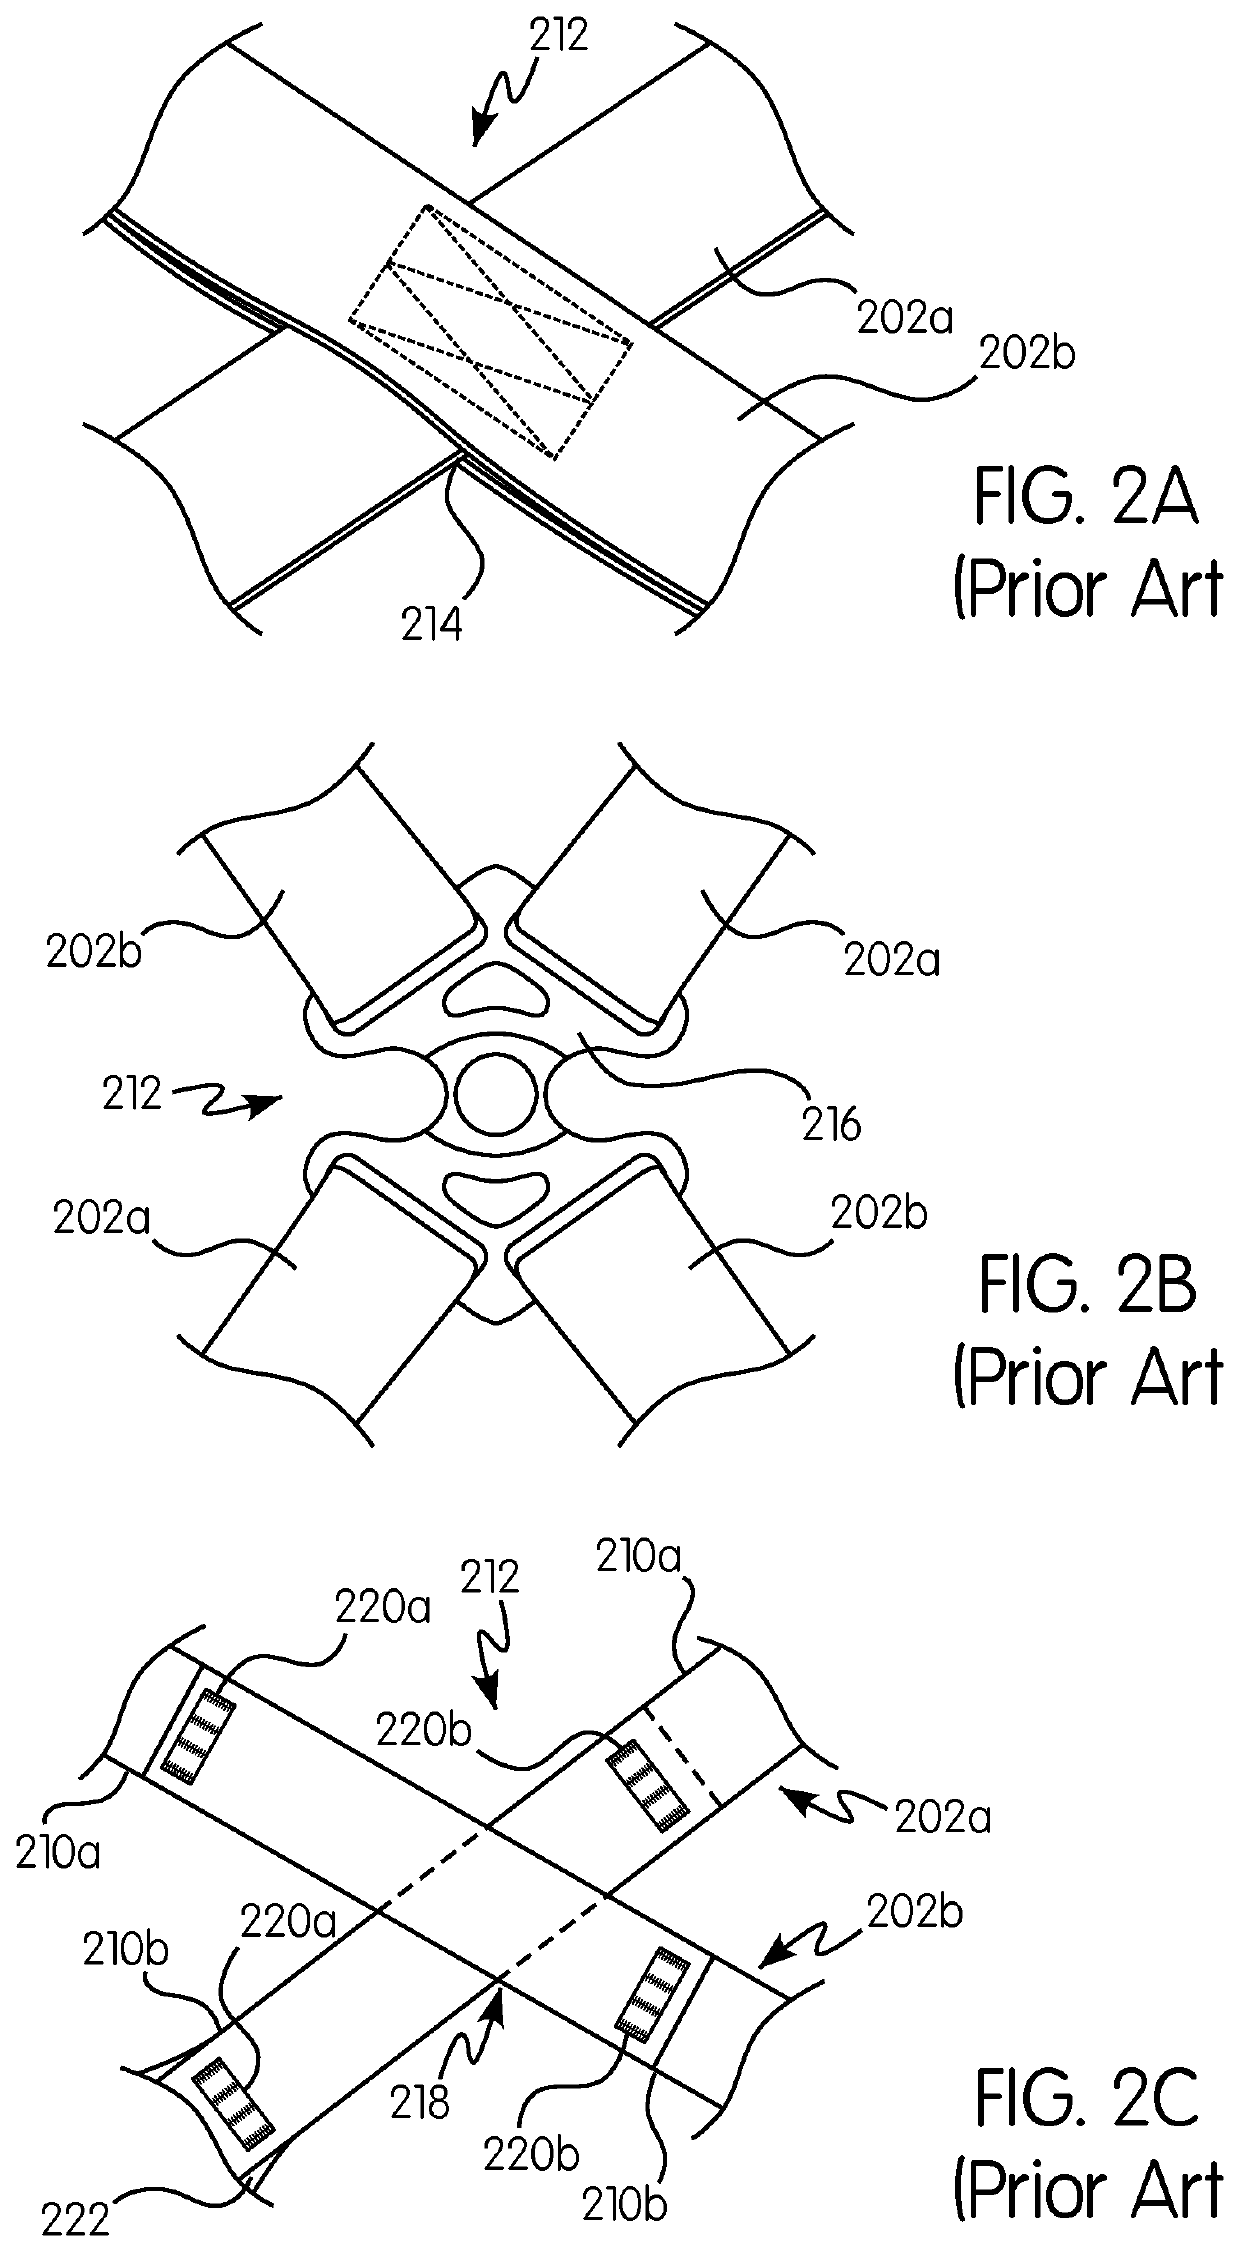 Harness with pivoting hip connection